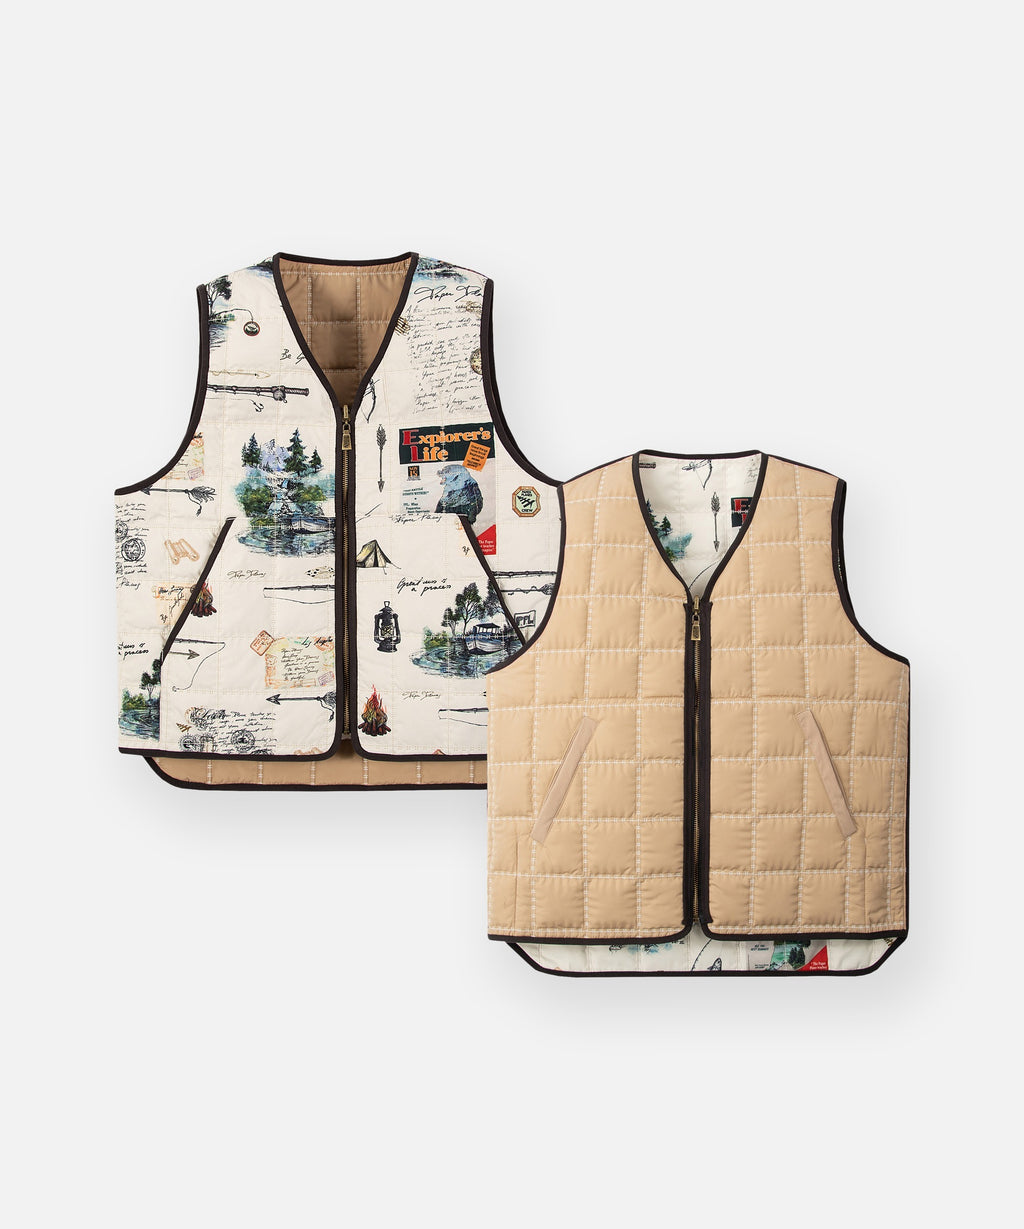  Paper Planes Explorer's Life Reversible Quilted Vest, shown in printed and solid sides.